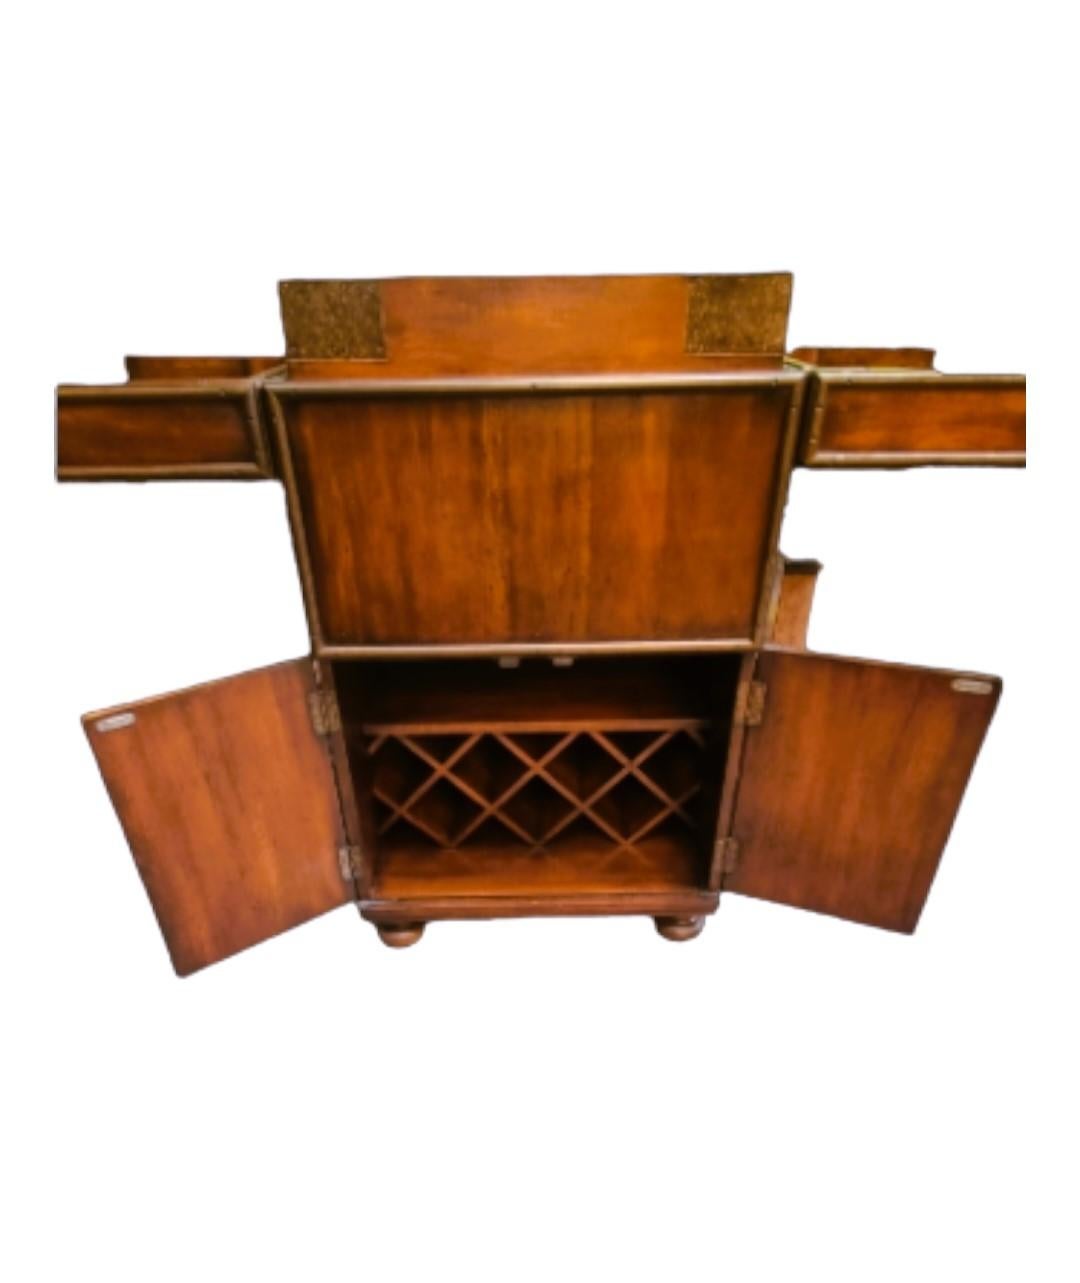 Other C20th Campaign Style Cocktail Cabinet For Sale